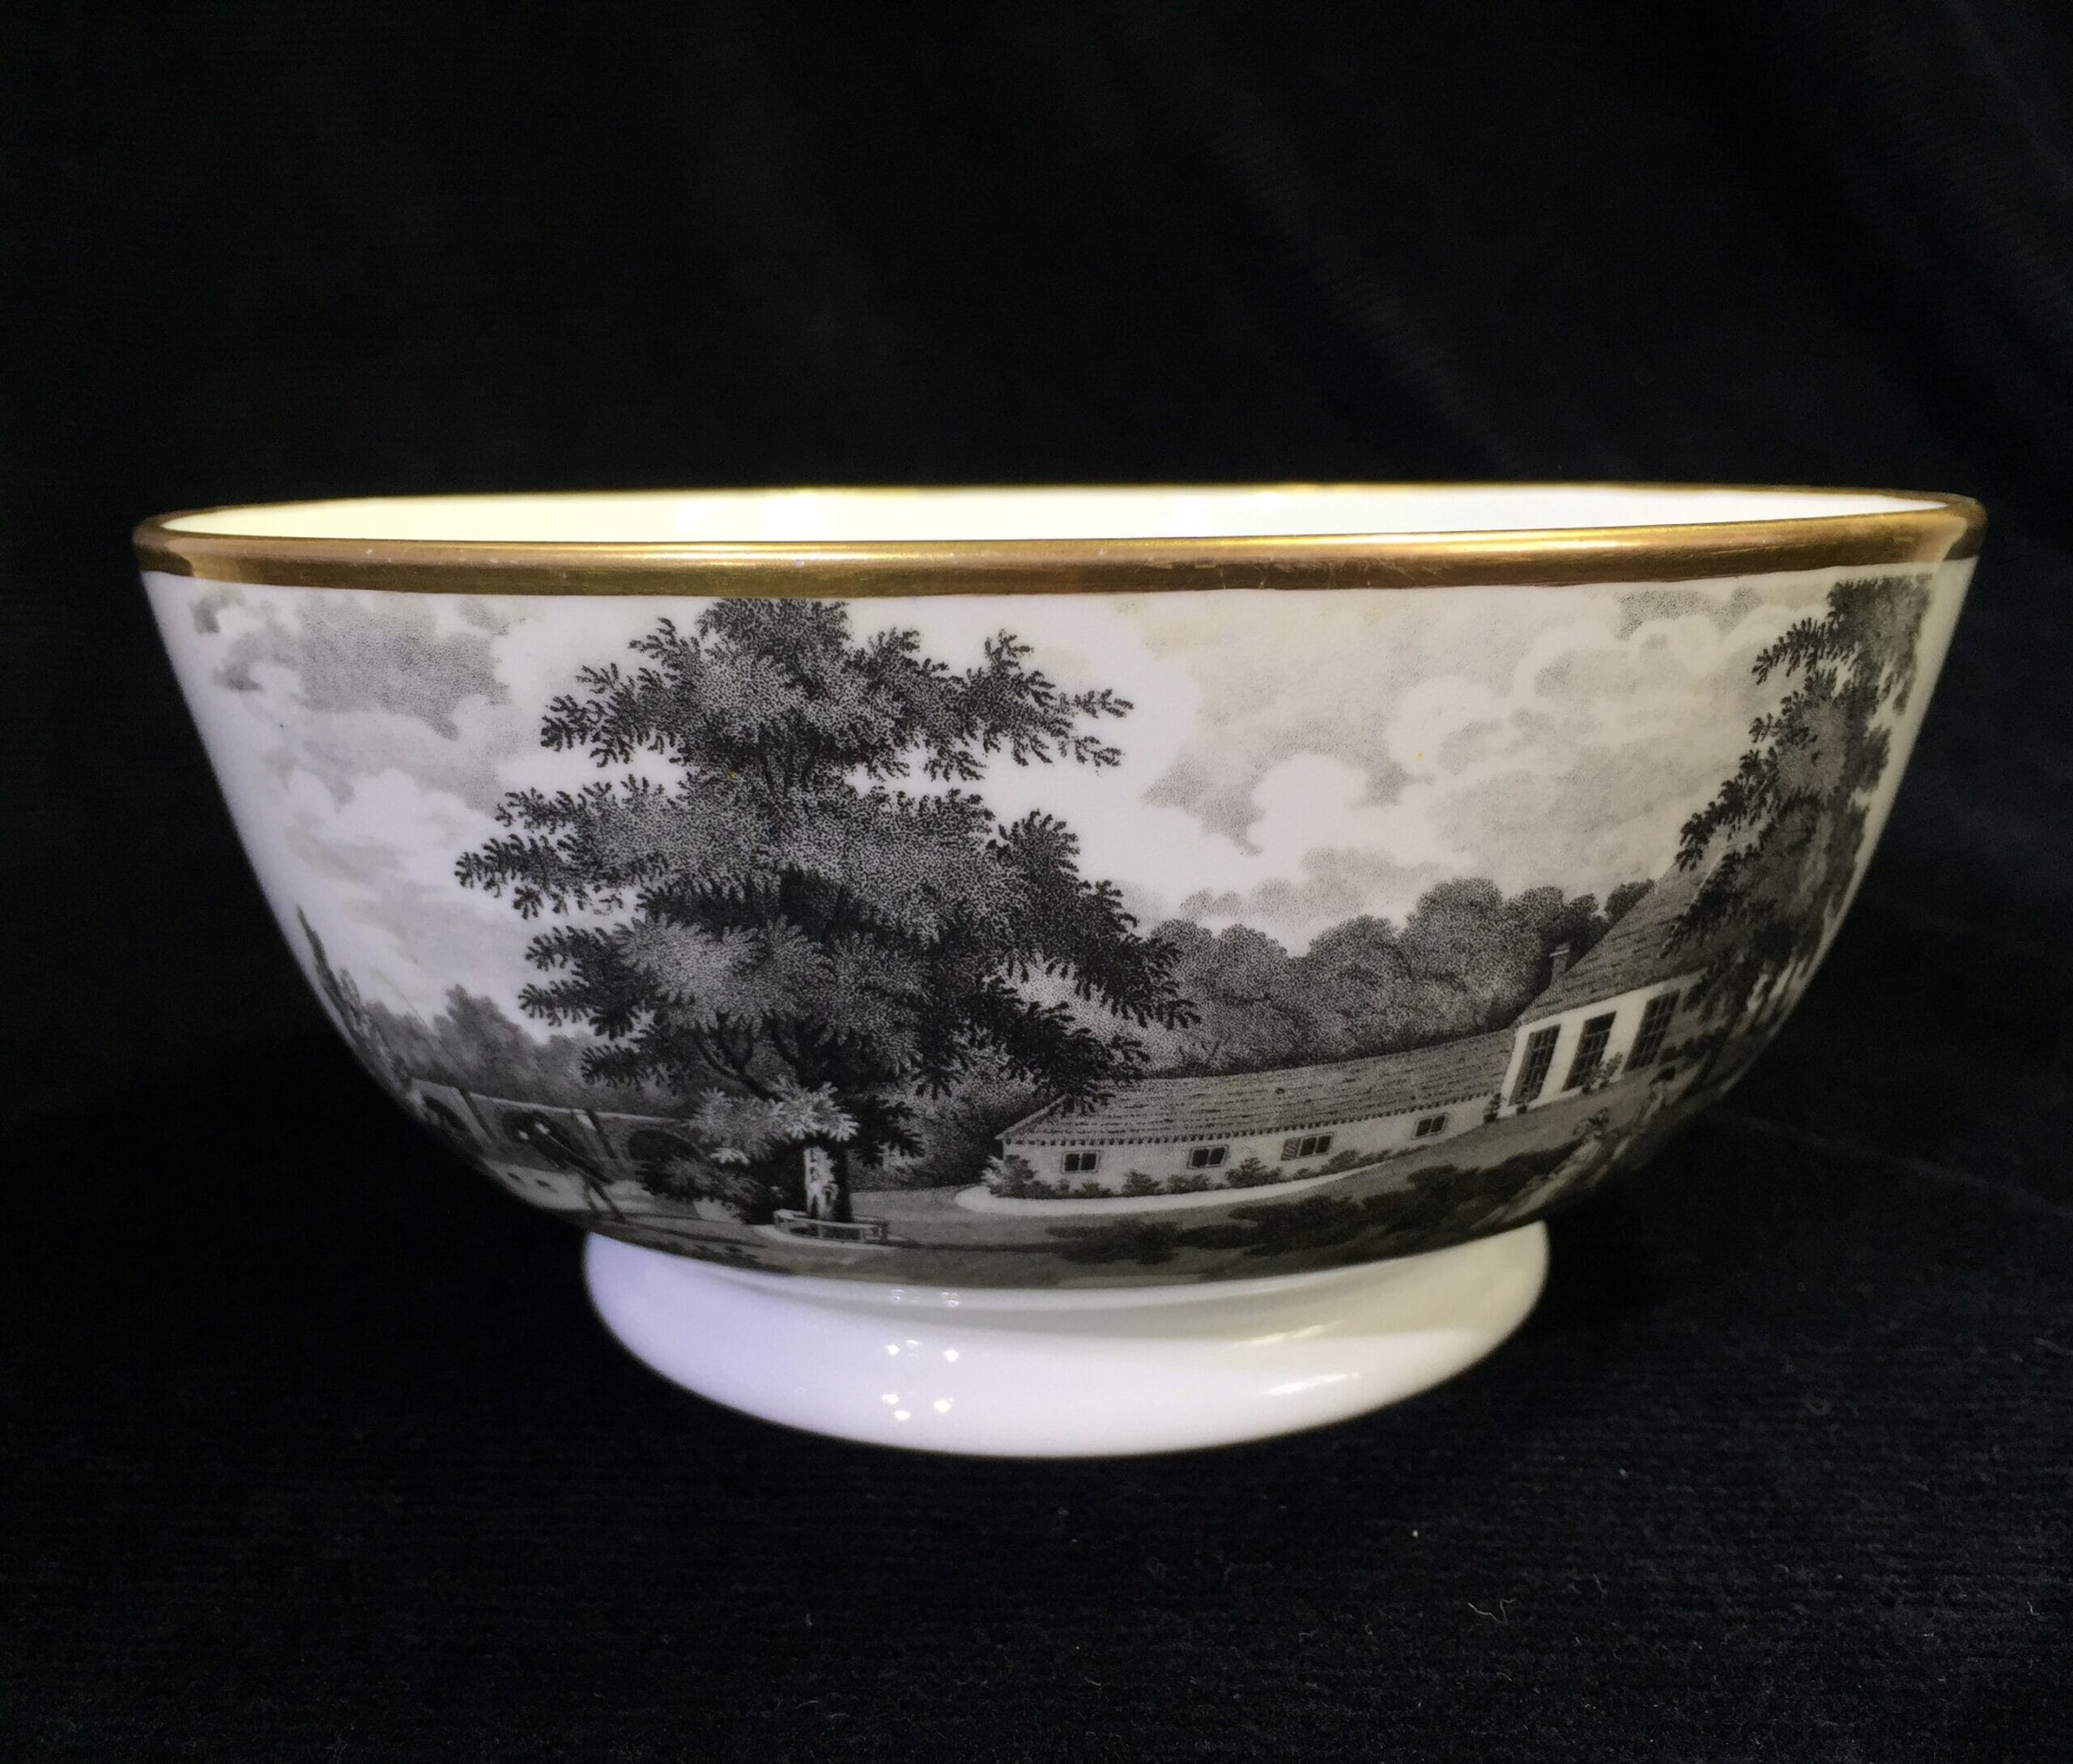 Newhall type bowl with large bat print, c.1810-0